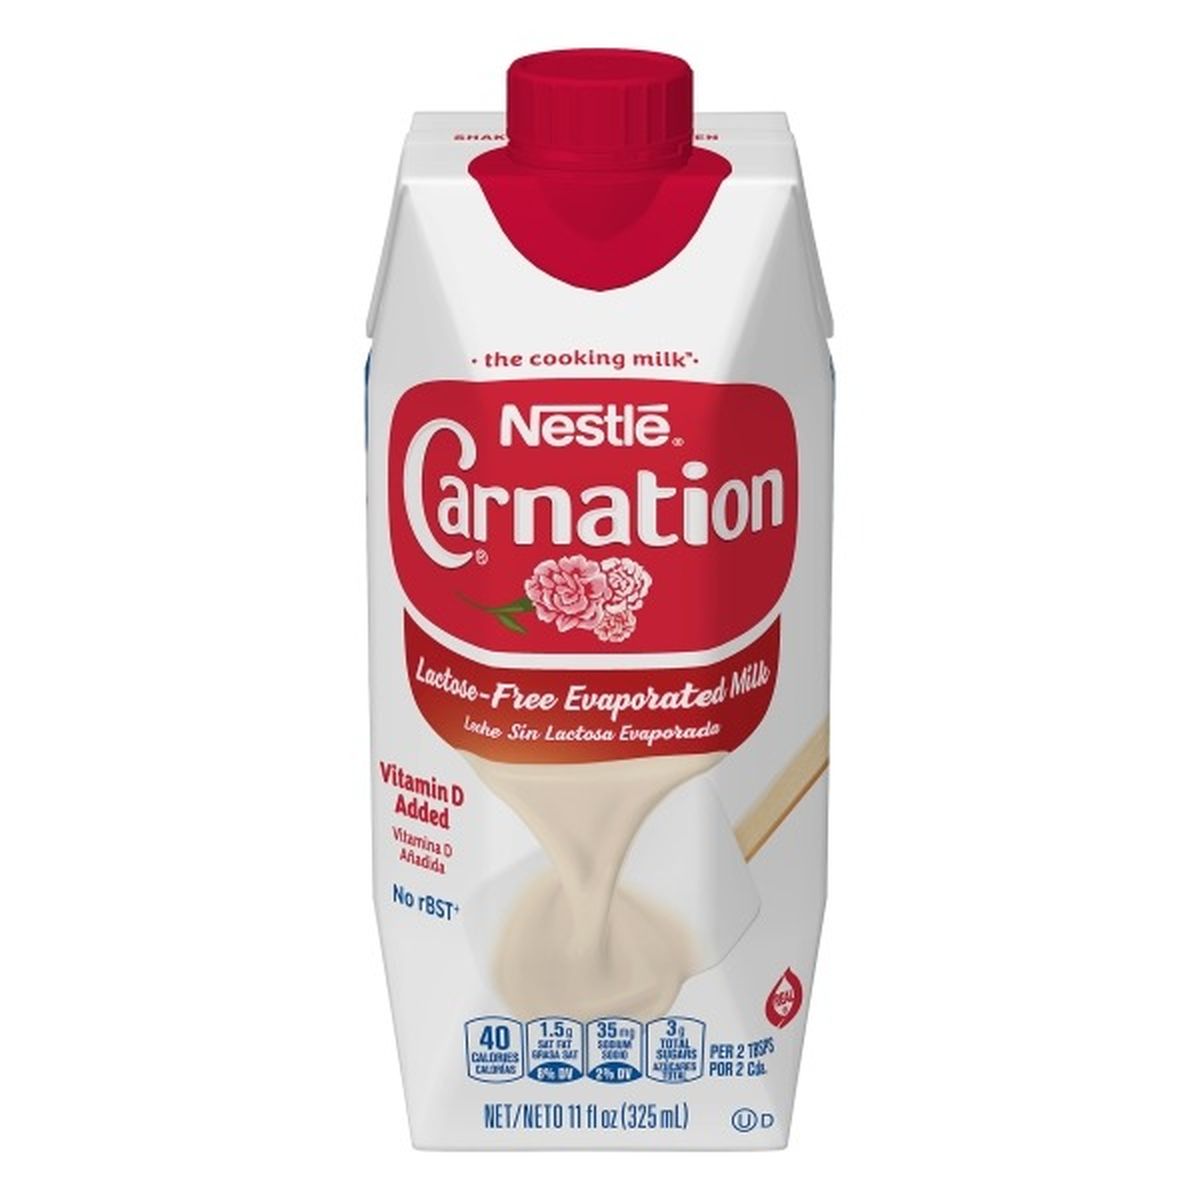 Calories in Carnation Evaporated Milk, Lactose-Free